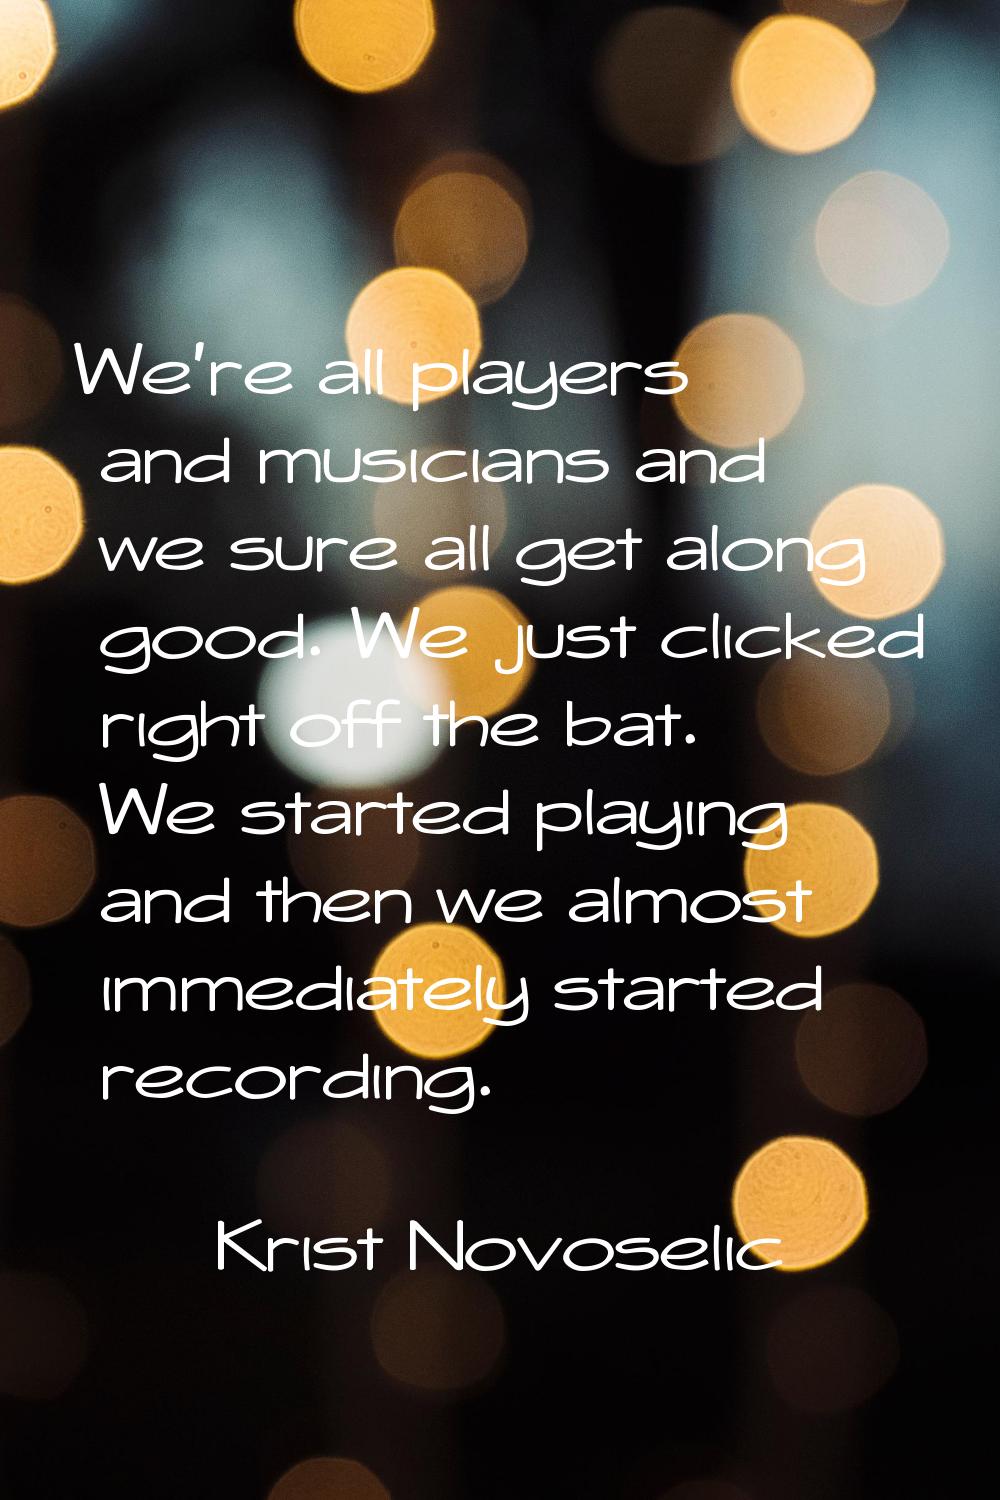 We're all players and musicians and we sure all get along good. We just clicked right off the bat. 